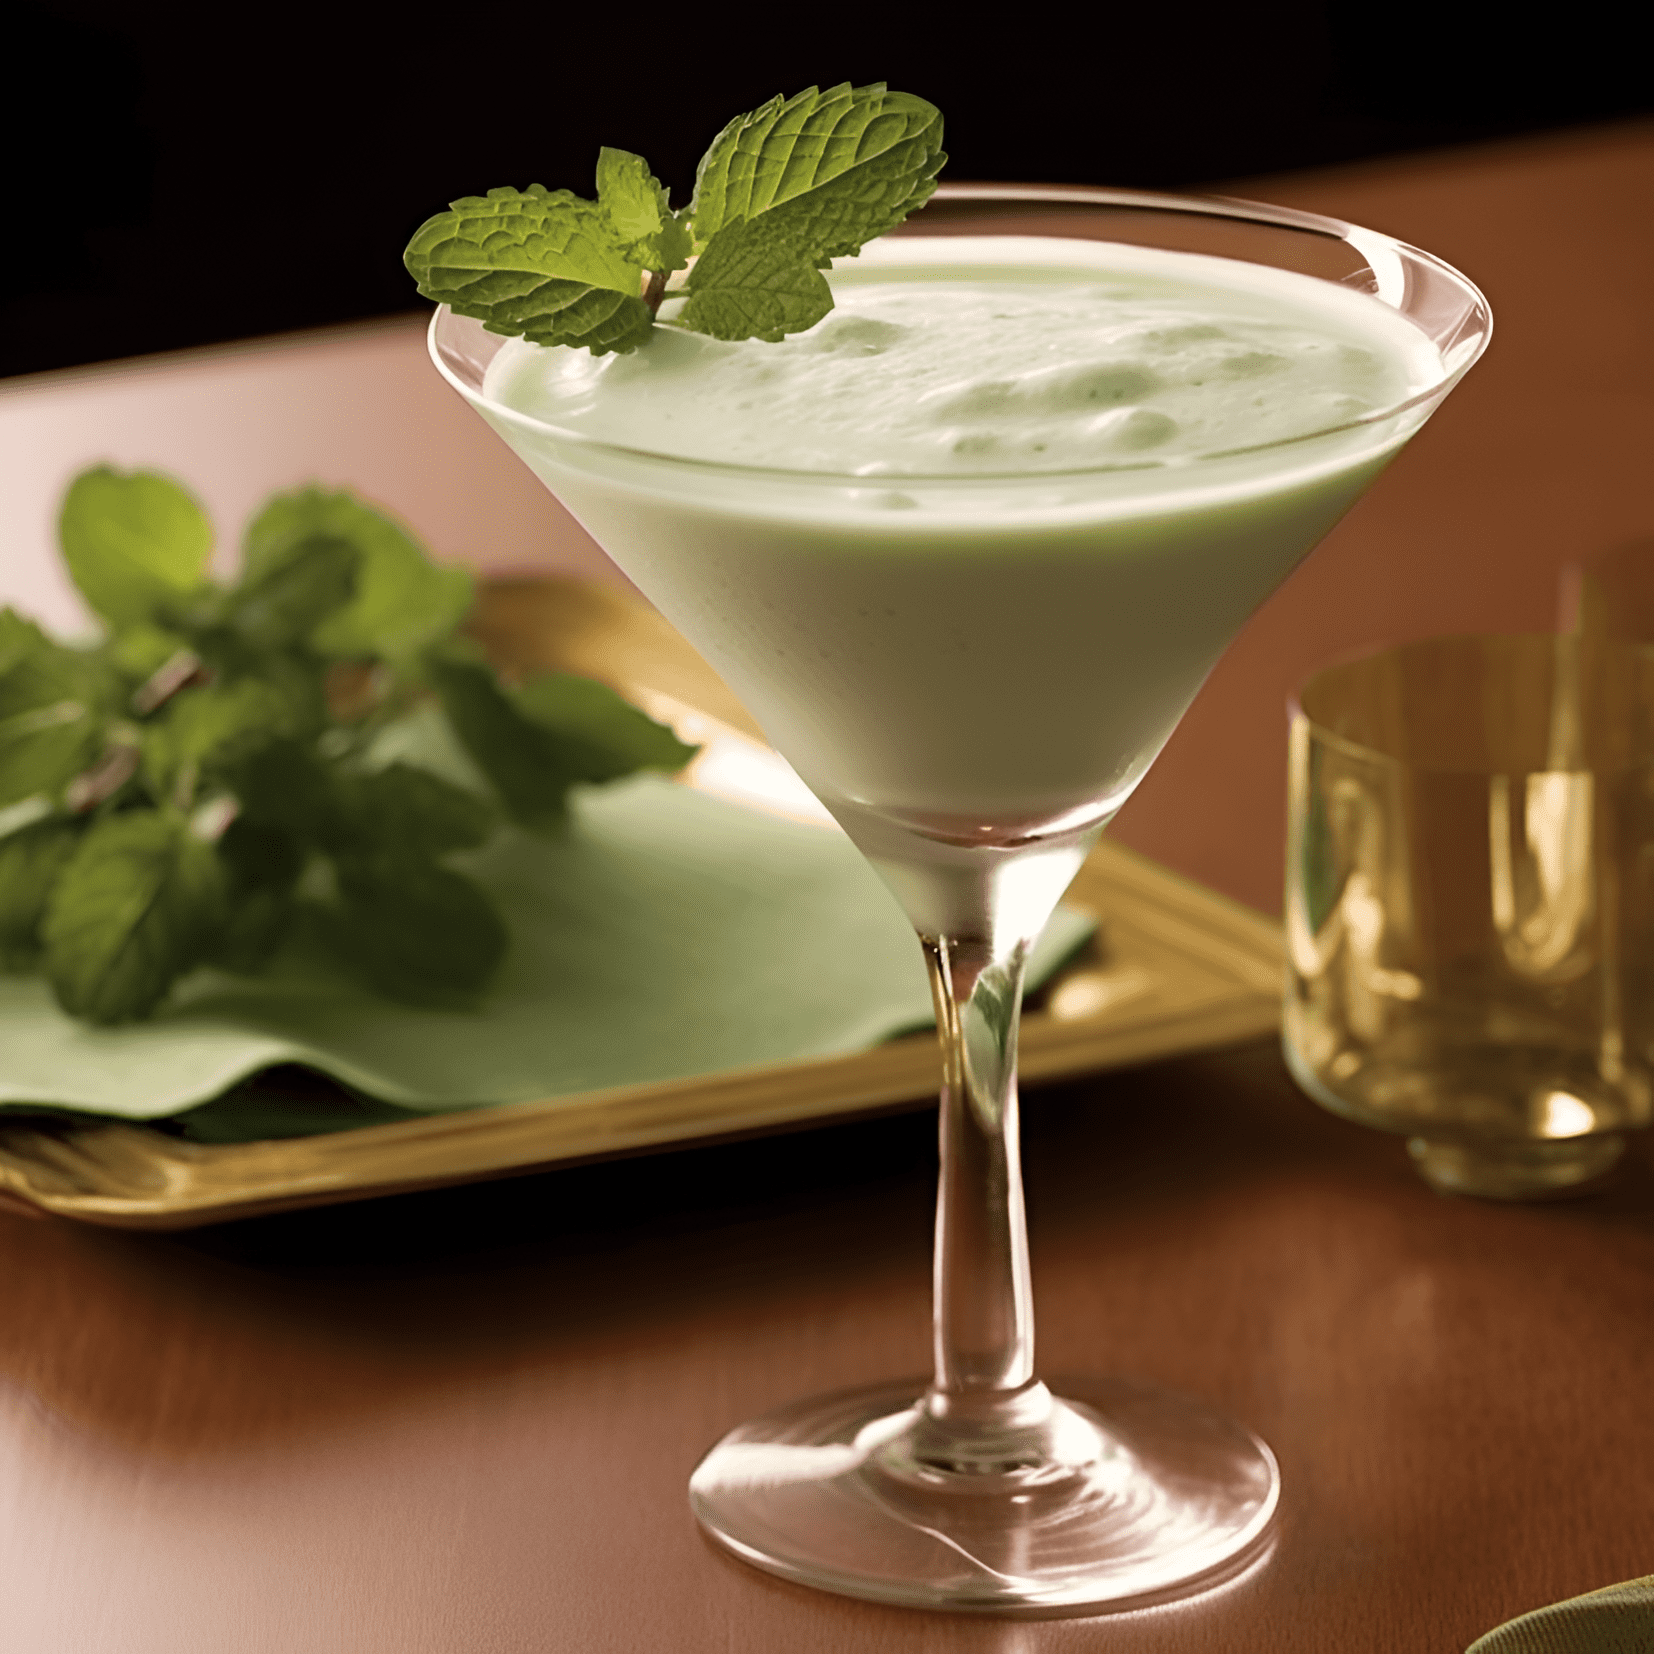 The Shamrock cocktail is a delightful mix of sweet, sour, and creamy flavors. The combination of Irish whiskey, green crème de menthe, and fresh cream creates a smooth, rich taste with a hint of minty freshness.